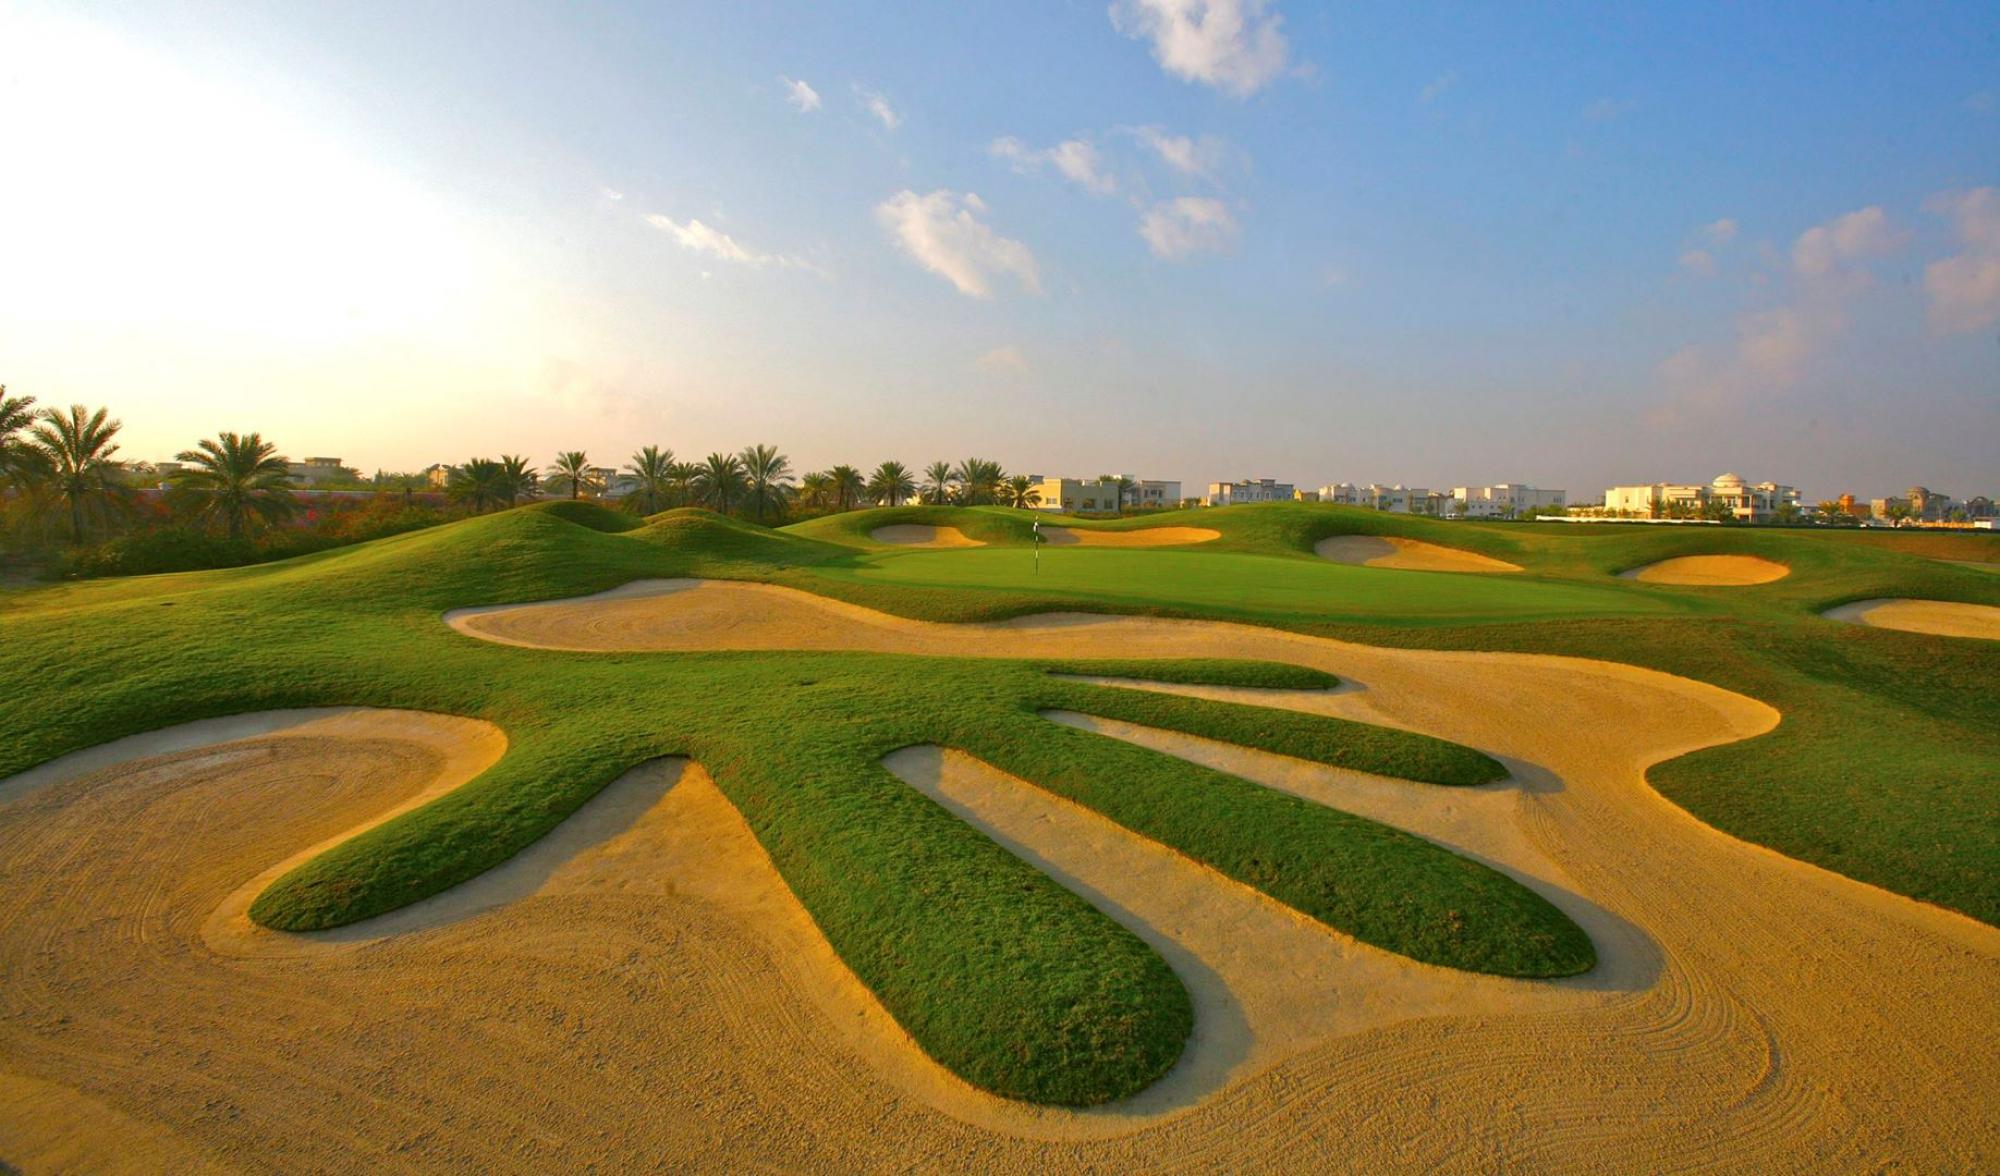 The Montgomerie Golf Club boasts among the best golf course in Dubai